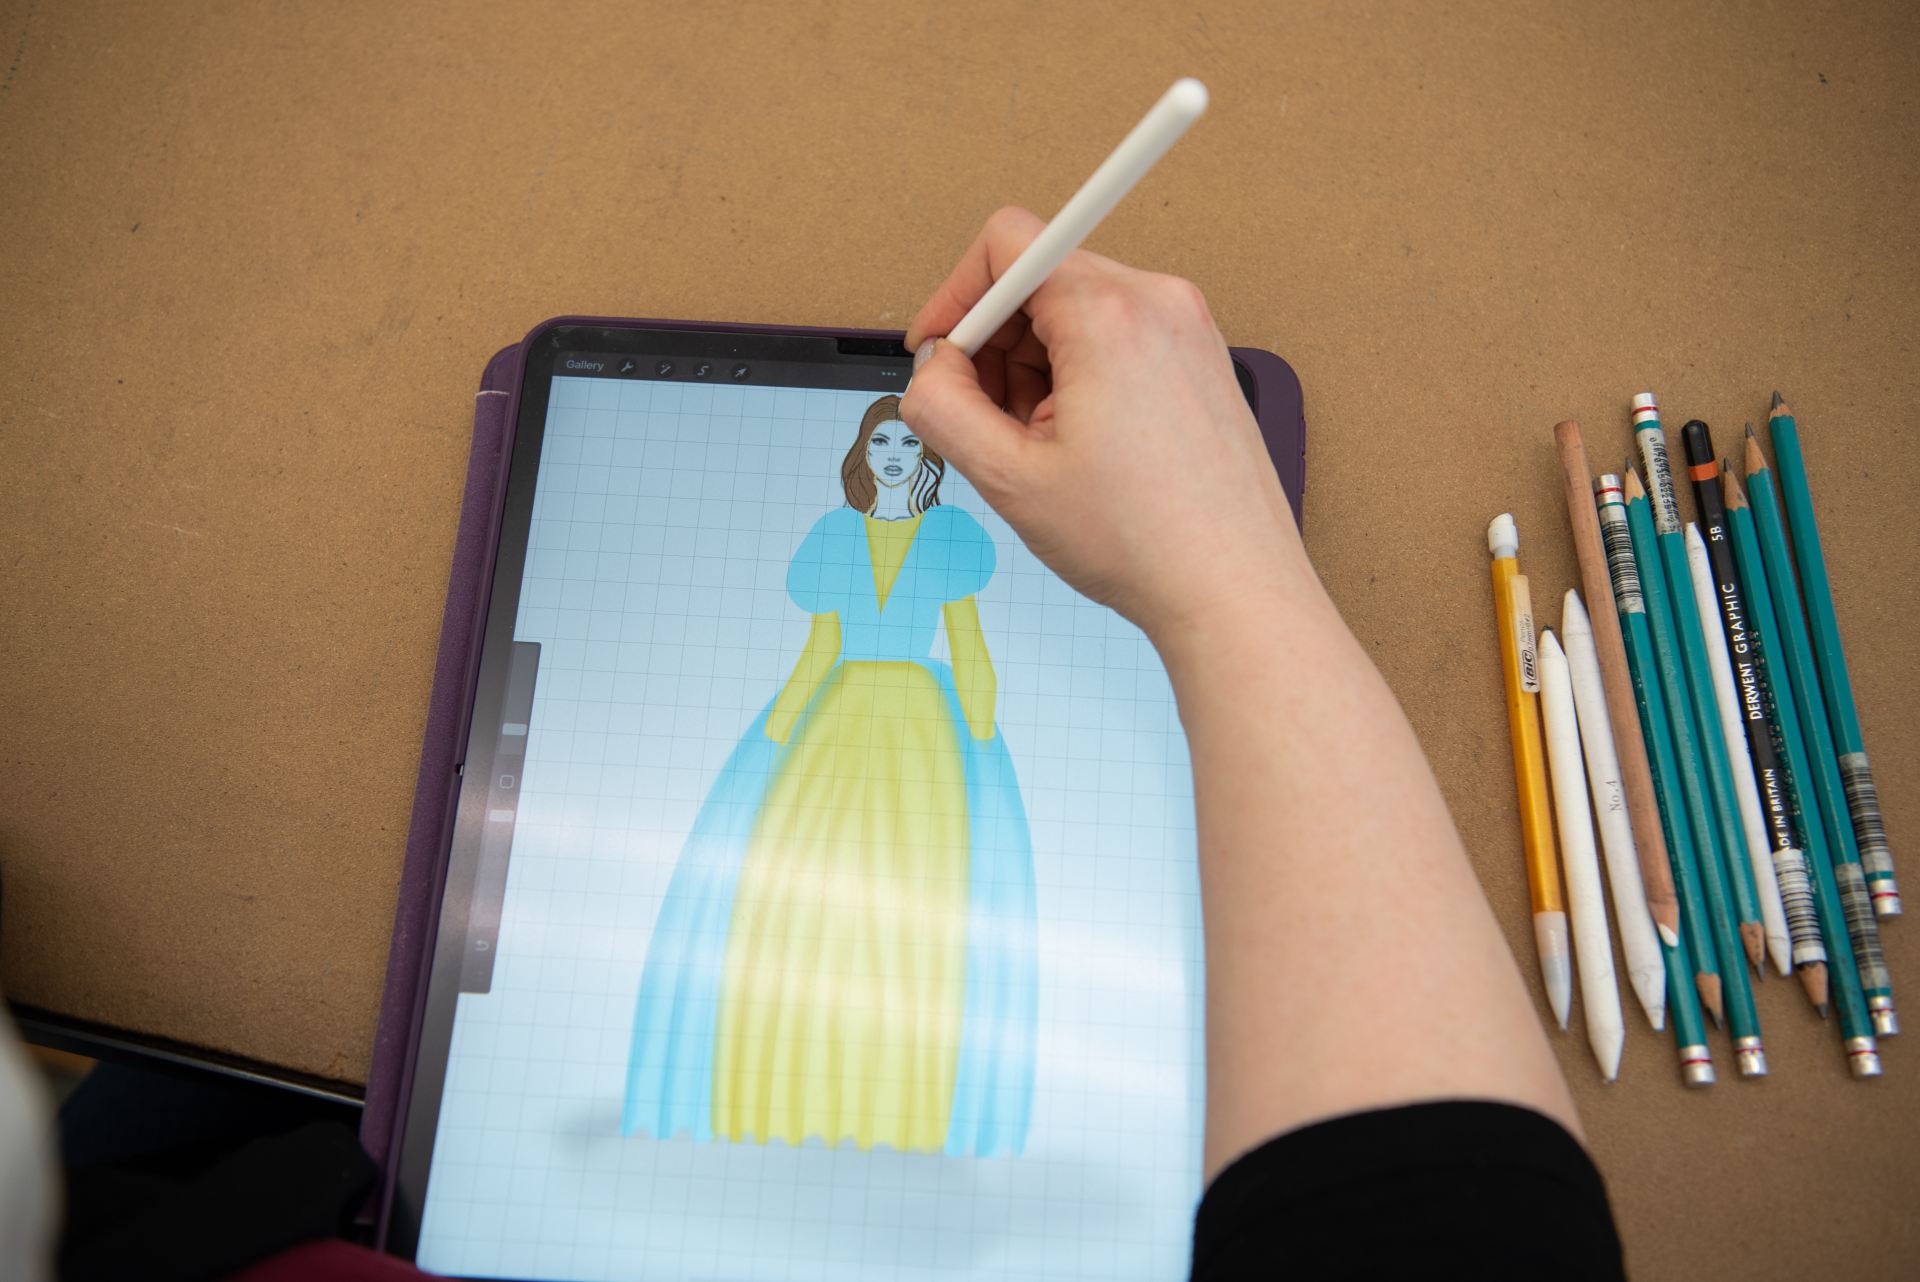 A person sketching a costume on an iPad.